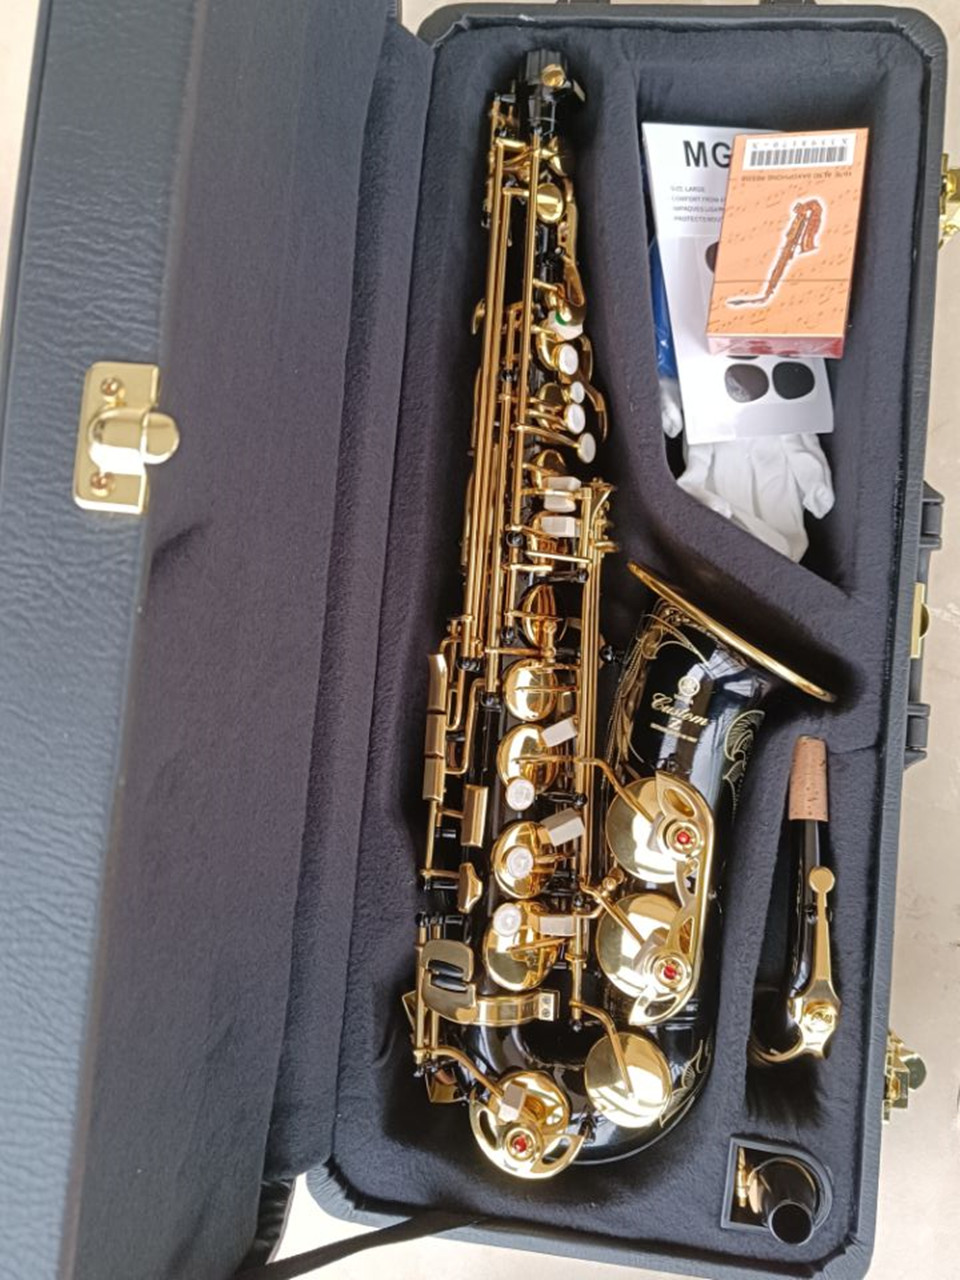 

Japan Brand New Black YAS-82Z Alto Saxophone E-Flat Gold Plated Key Professional Sax With Mouthpiece Leather Case and Accessories Music Instrument